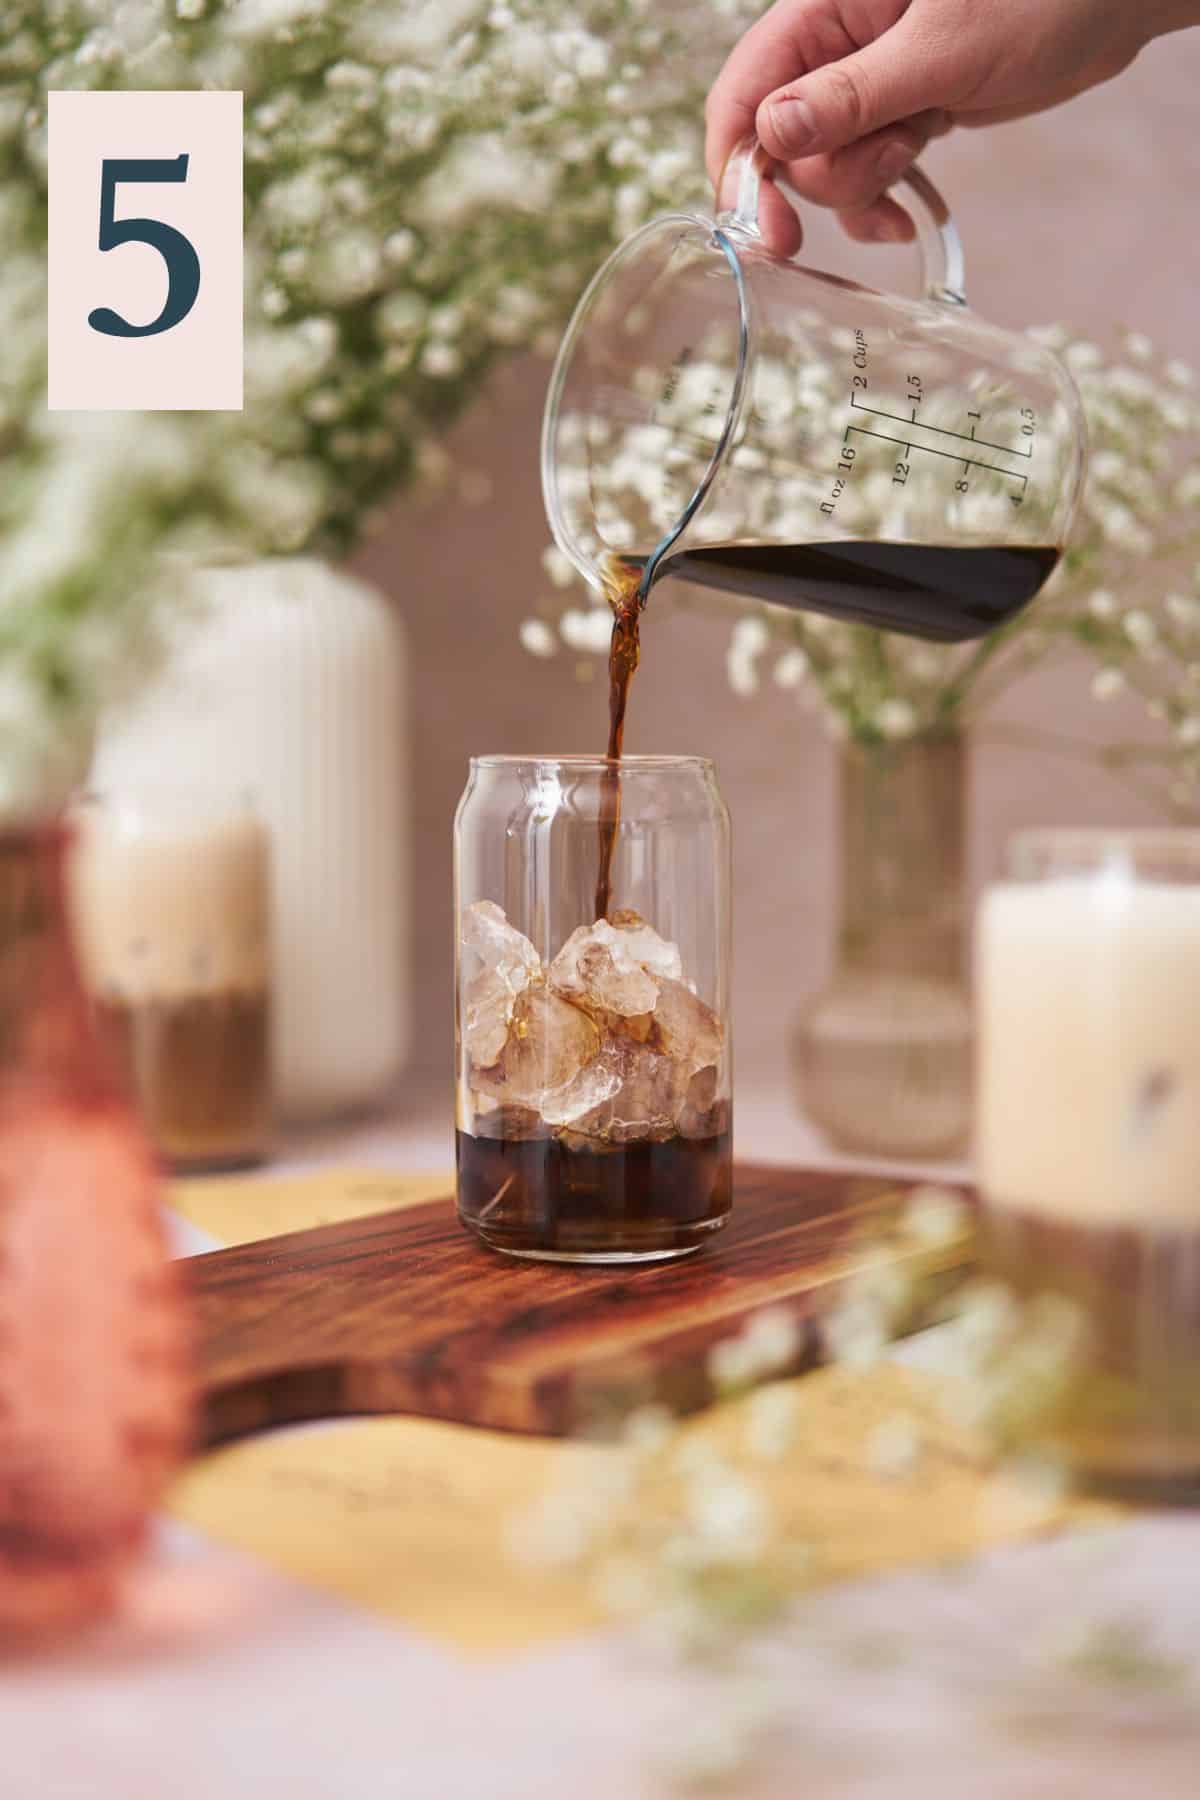 pouring iced coffee into a glass with ice, surrounded by glasses, and vases with small white baby's breath flowers.